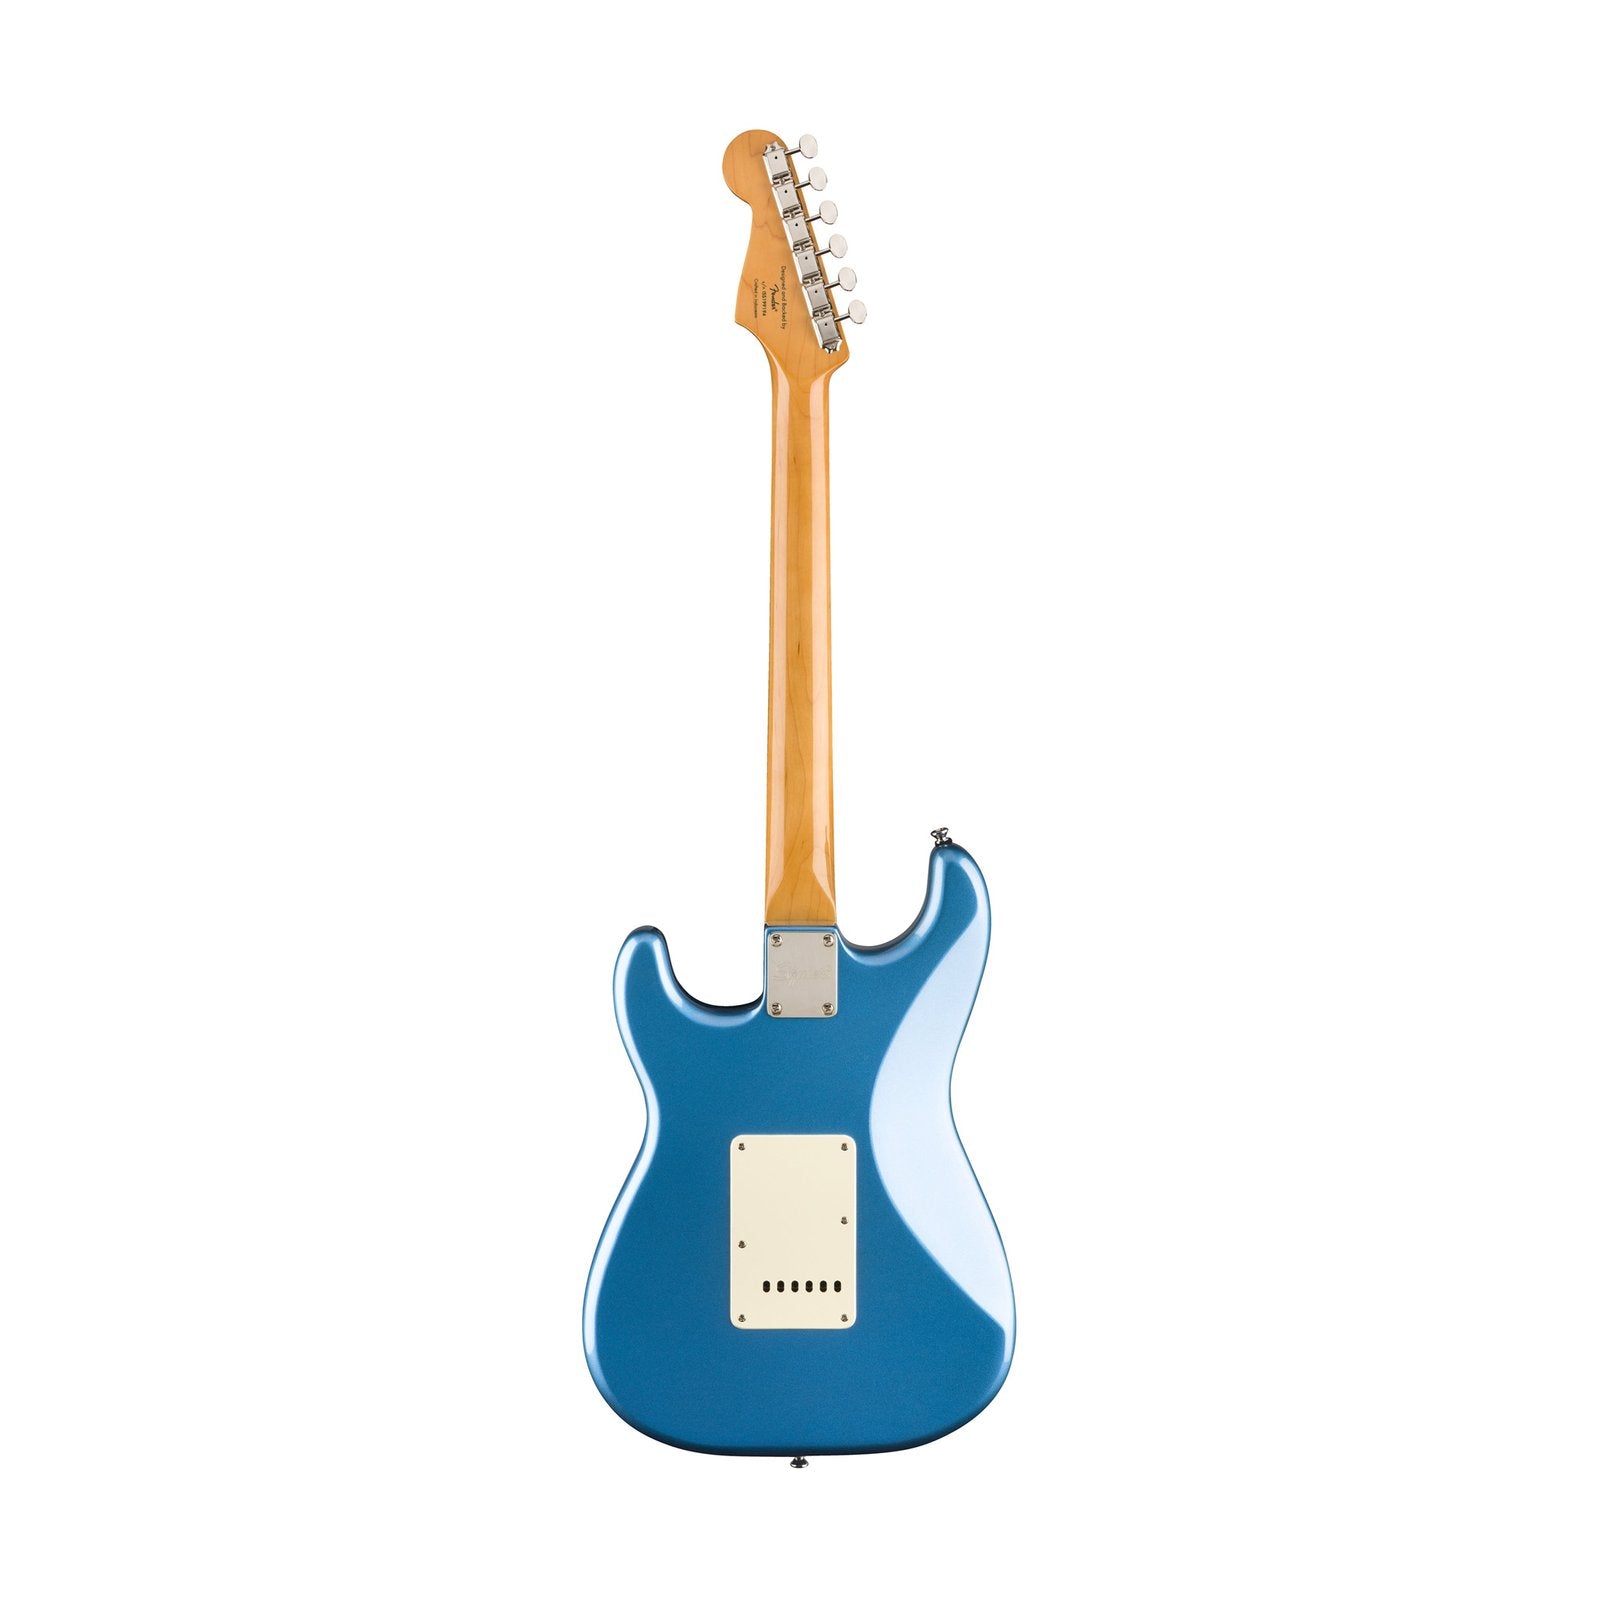 Squier Classic Vibe 60s Stratocaster Electric Guitar, Laurel FB, Lake Placid Blue, SQUIER BY FENDER, ELECTRIC GUITAR, squier-by-fender-electric-guitar-037-4010-502, ZOSO MUSIC SDN BHD